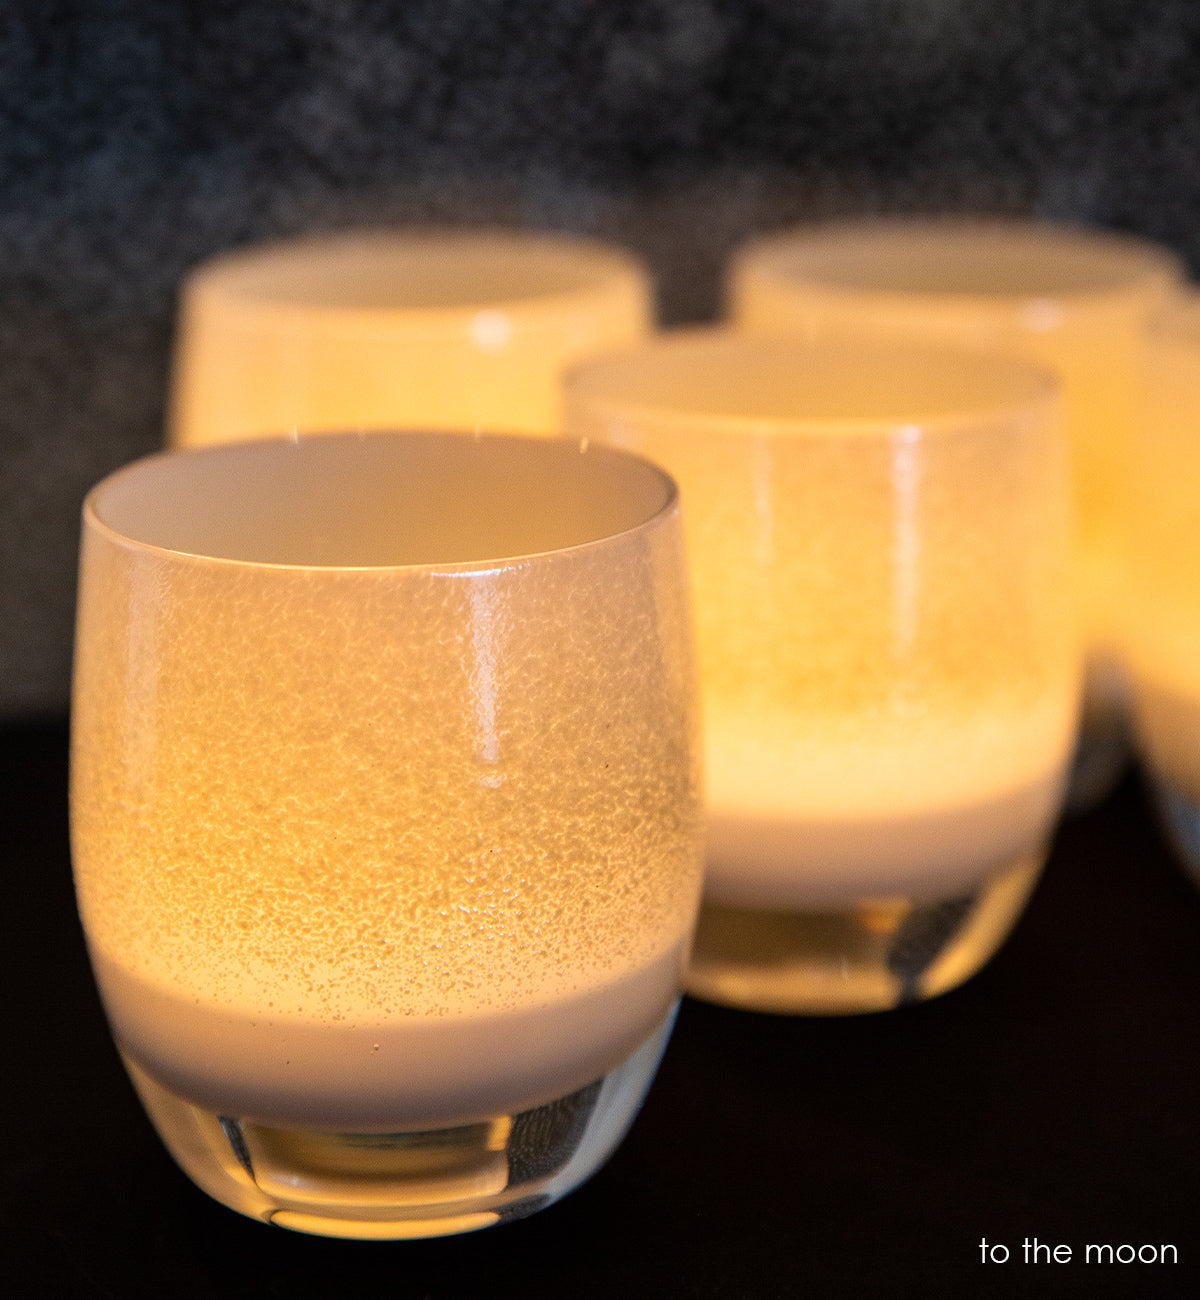 to the moon light grey and white, hand-blown glass votive candle holder.